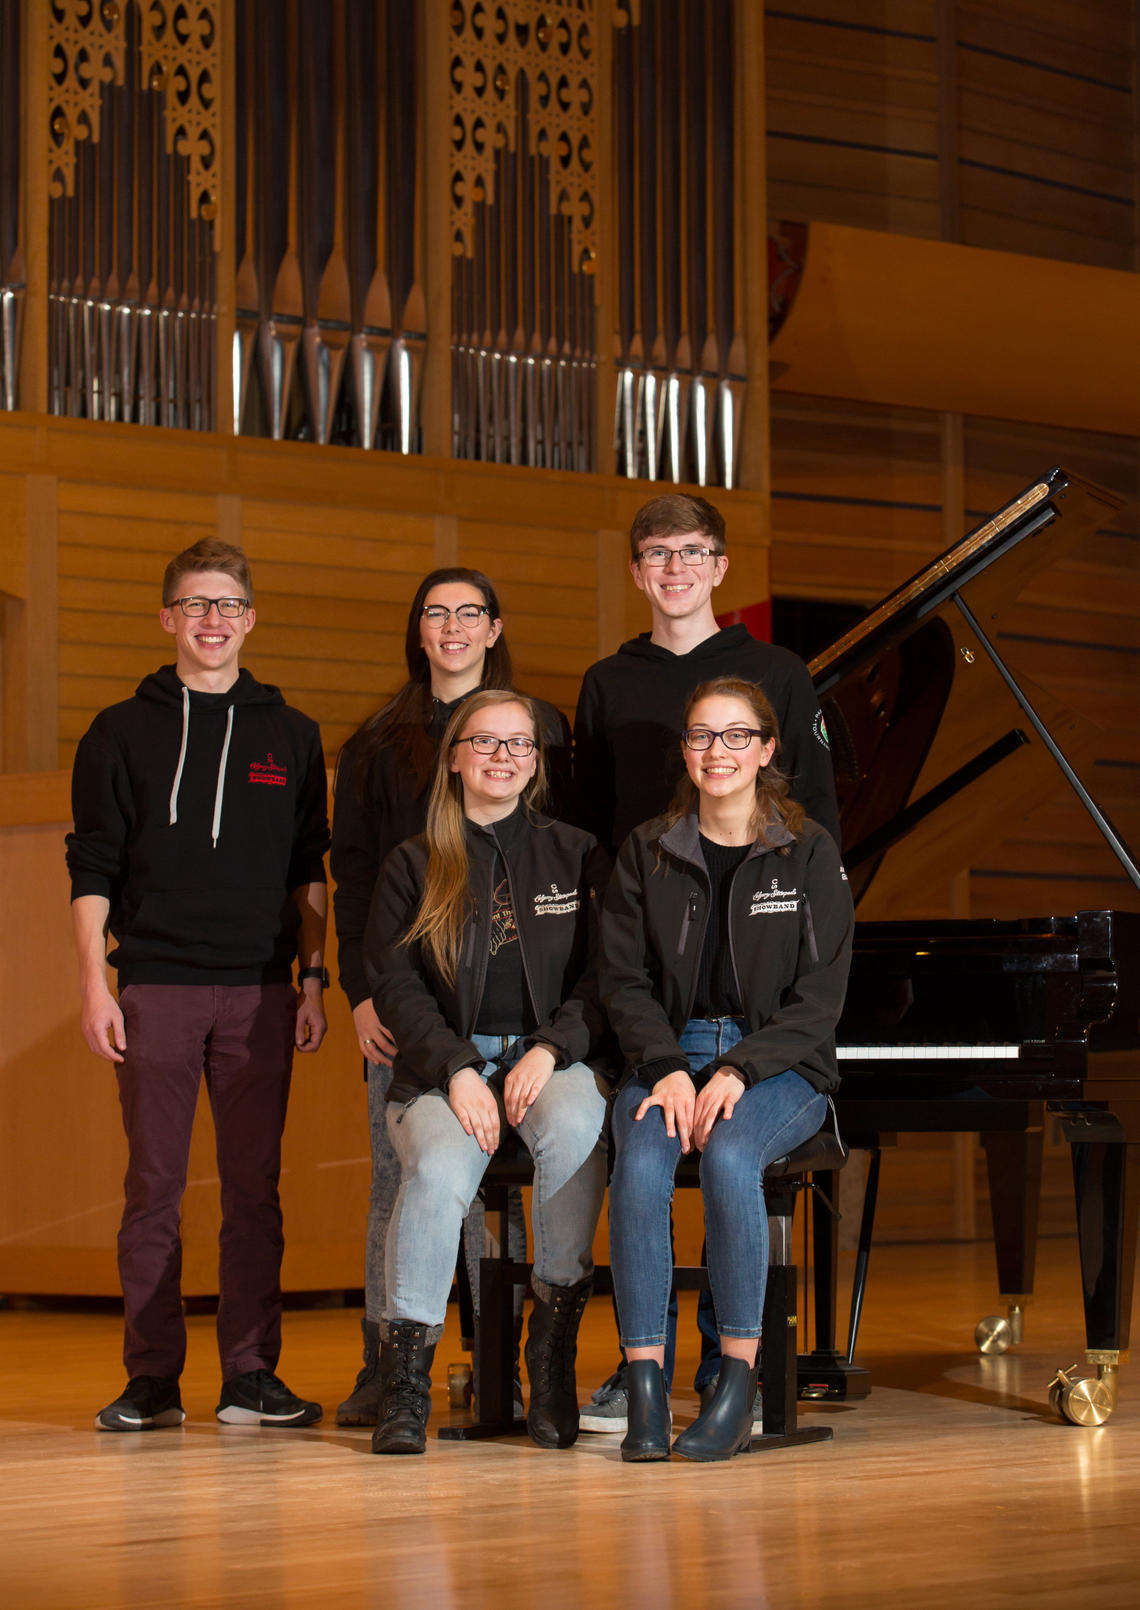 Among University of Calgary students taking part in the upcoming Alberta International Band Festival on campus are, standing, from left: Connor Beatty, Renee Thoutenhoofd, and Ethan Toblan. Seated, from left: Jessica Silbernagel and Anna Carlson.